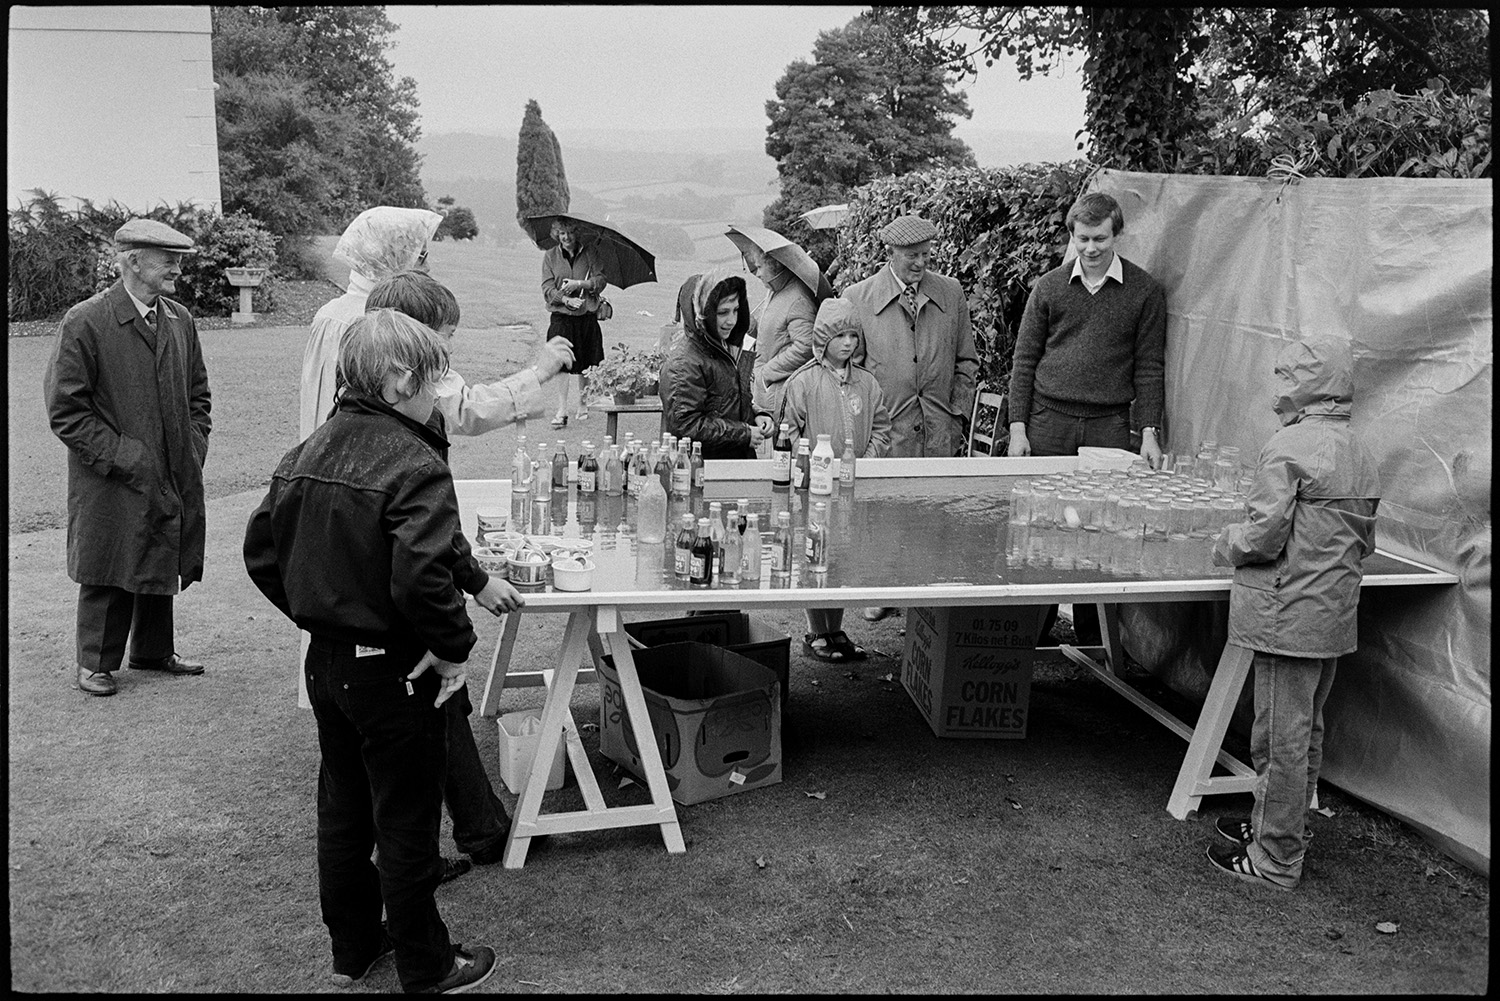 Vicarage fete, throwing the ping pong ball into the jar. Umbrellas in rain in garden. 
[A woman trying to win a prize bottle by throwing a ping pong ball in a jar, in the rain at the vicarage fete at Merton Rectory. Children and men are watching her. Two women are holding umbrellas in the background.]